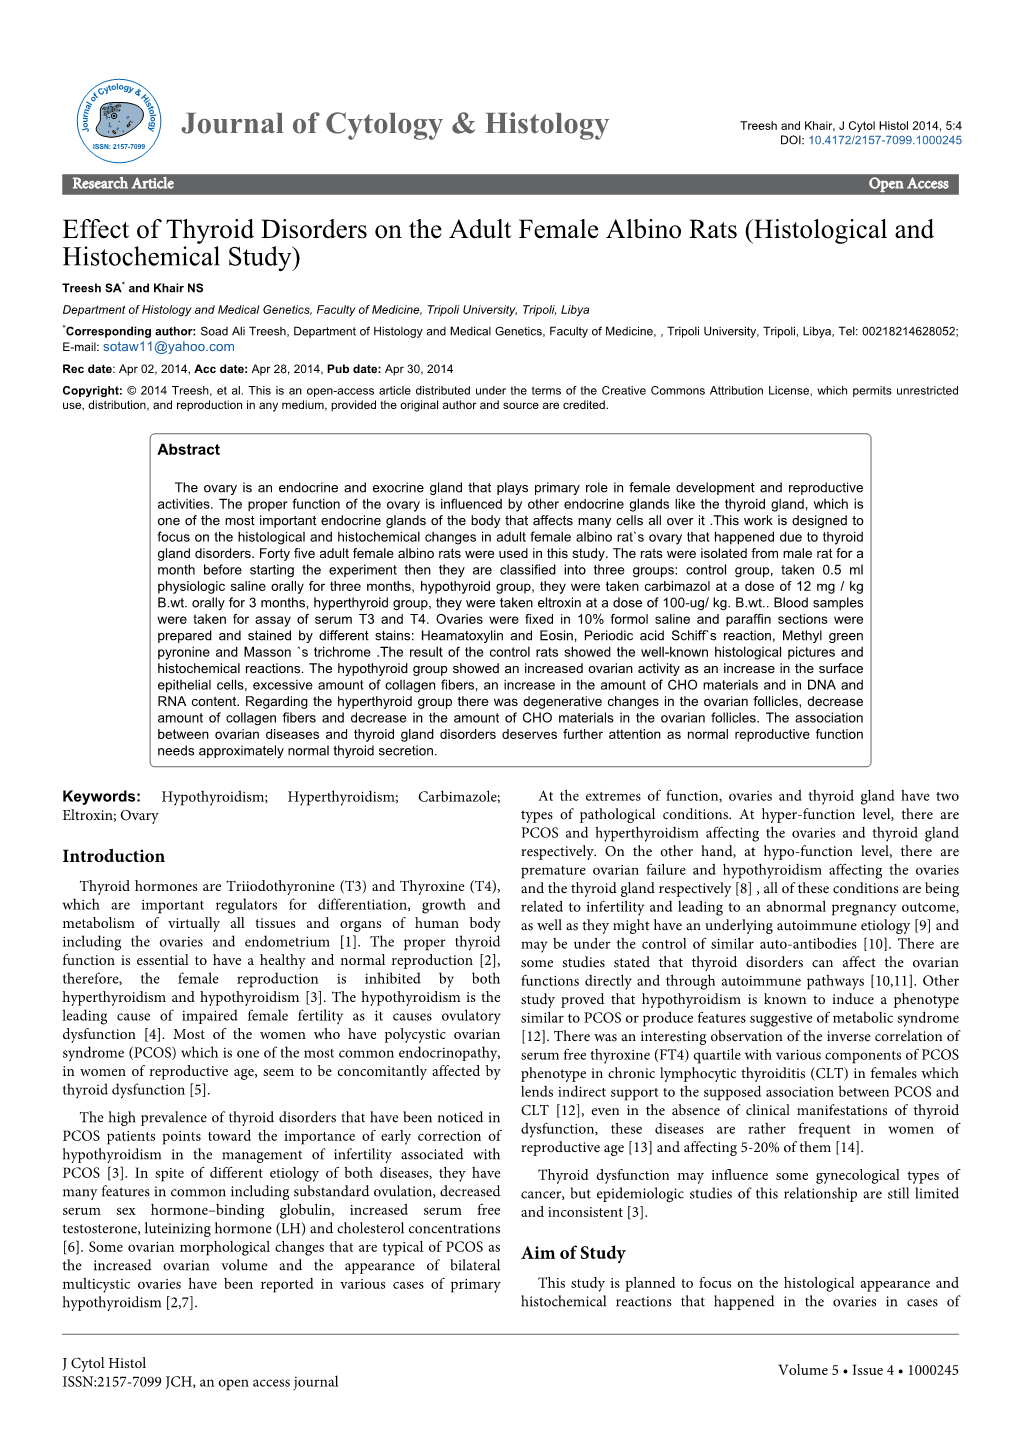 Effect of Thyroid Disorders on the Adult Female Albino Rats